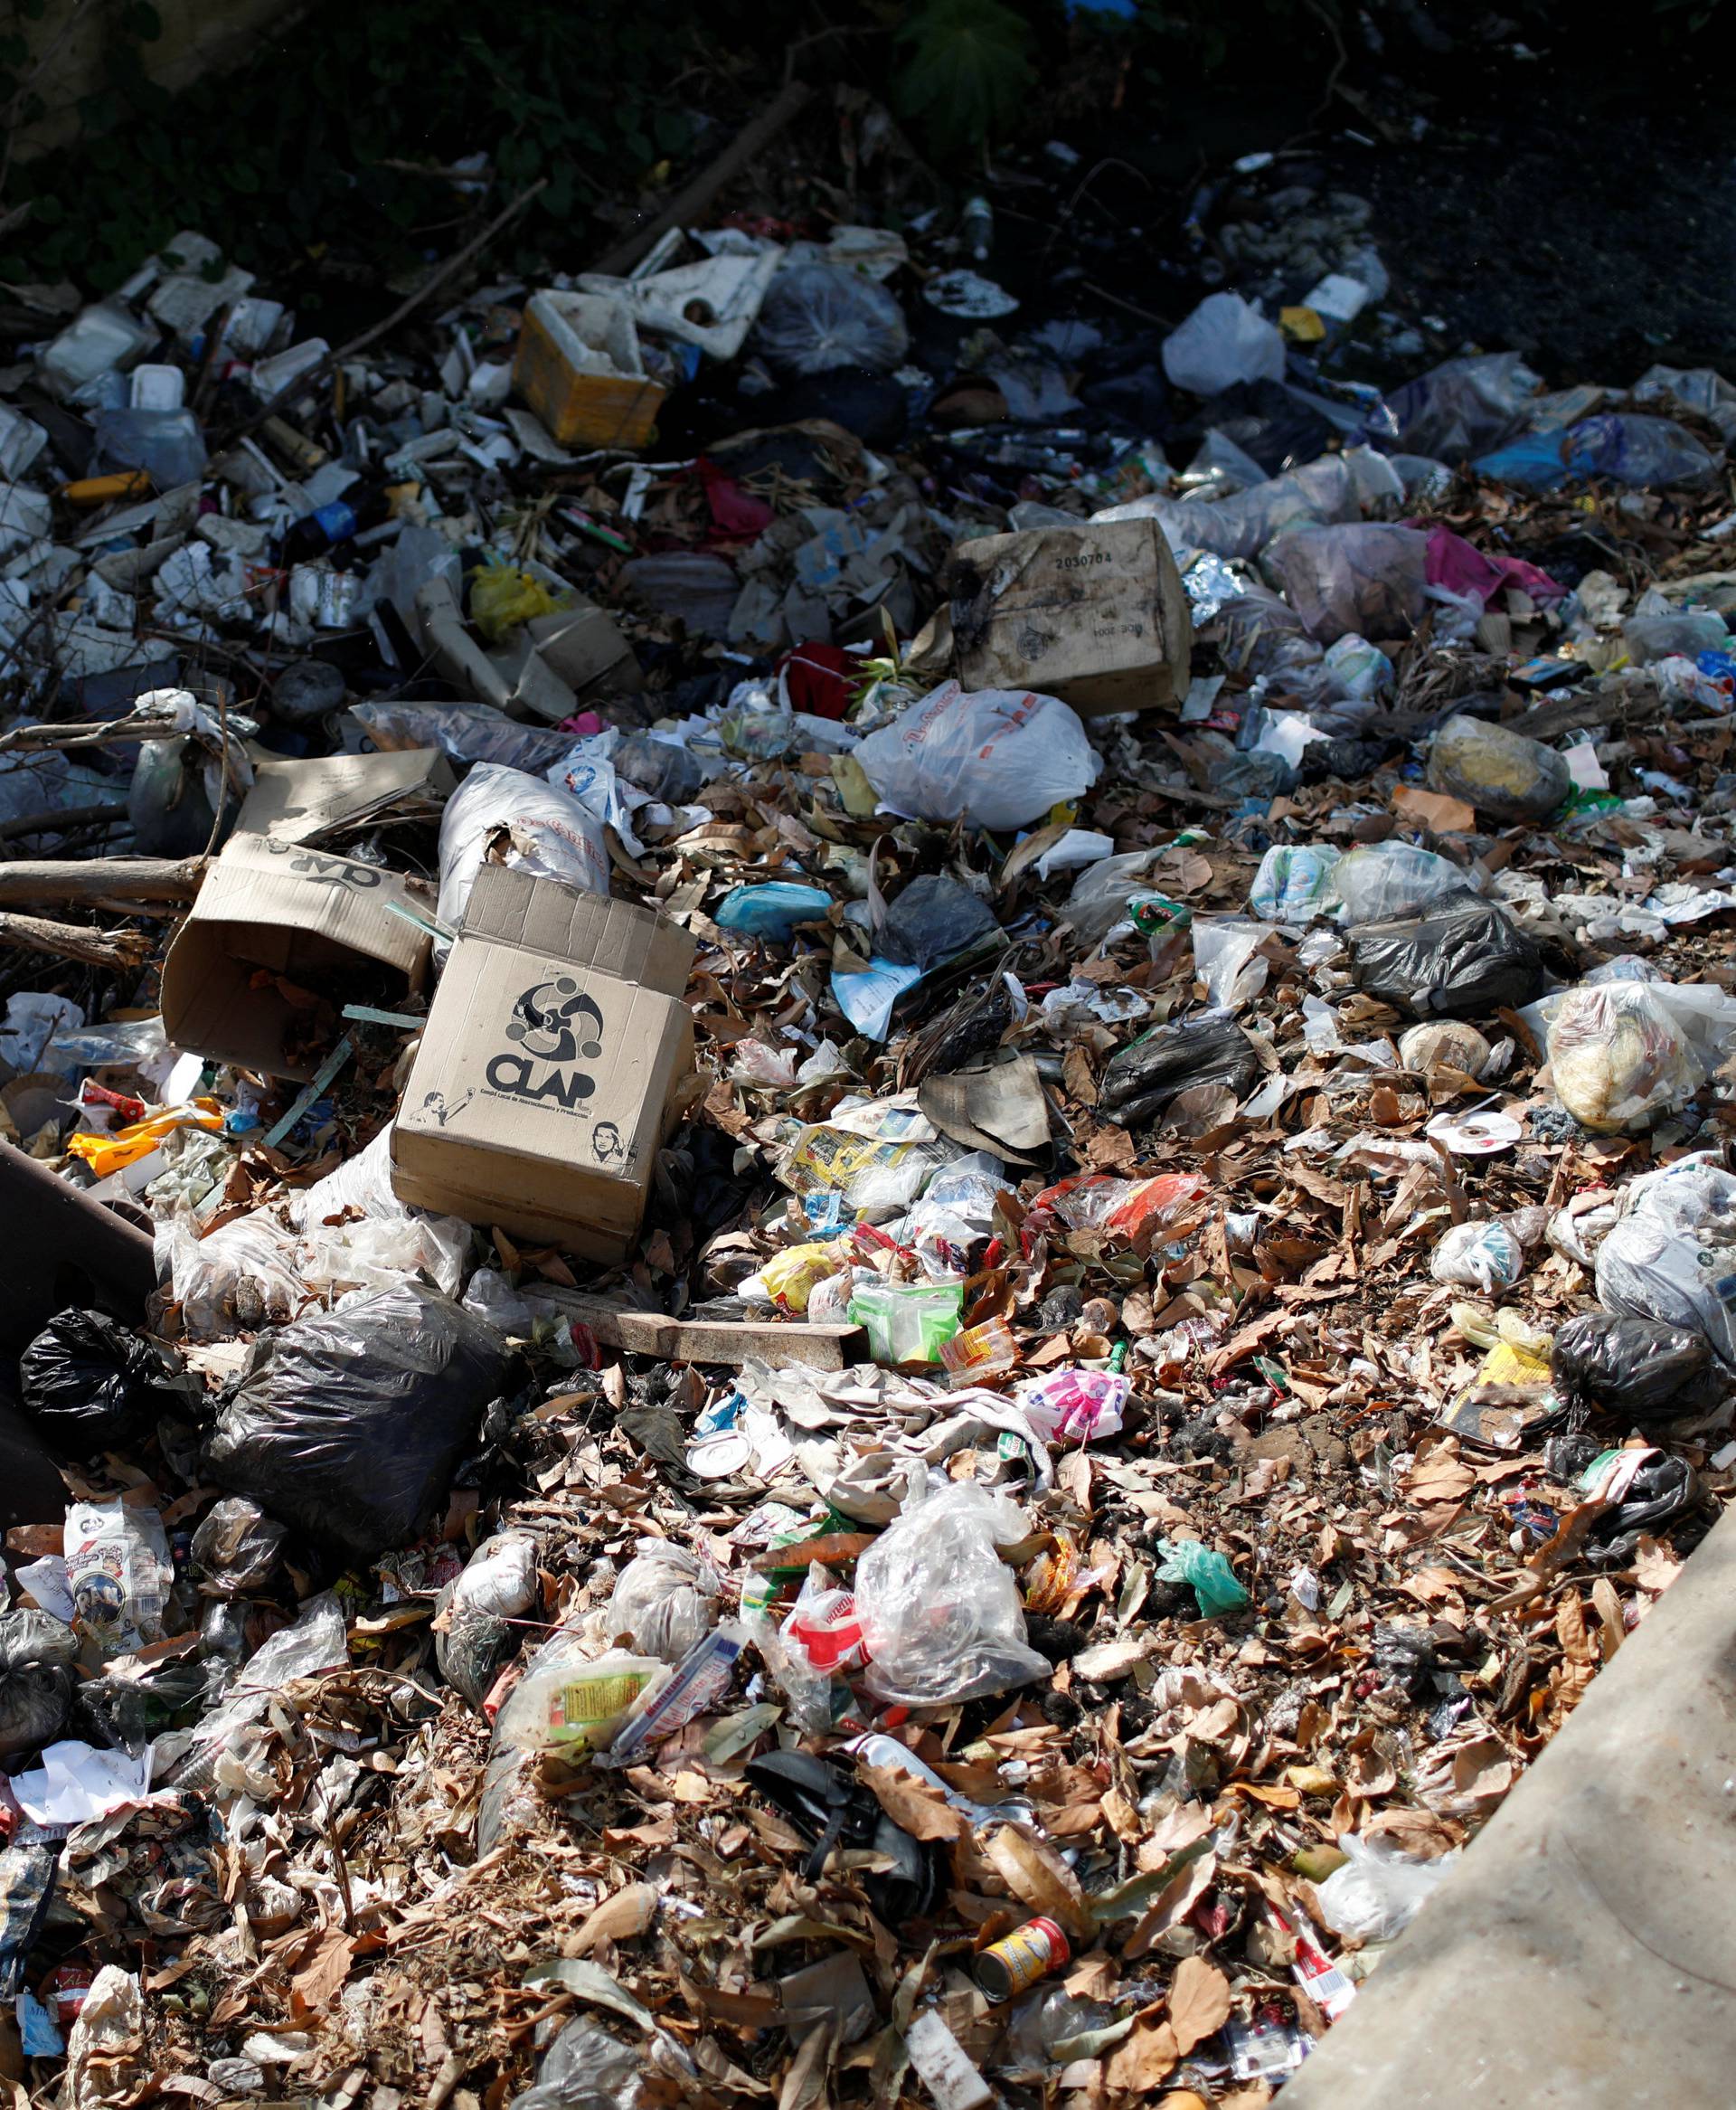 A CLAP box, a Venezuelan government handout of basic food supplies, is seen amid garbage dump along a canal in Maracaibo